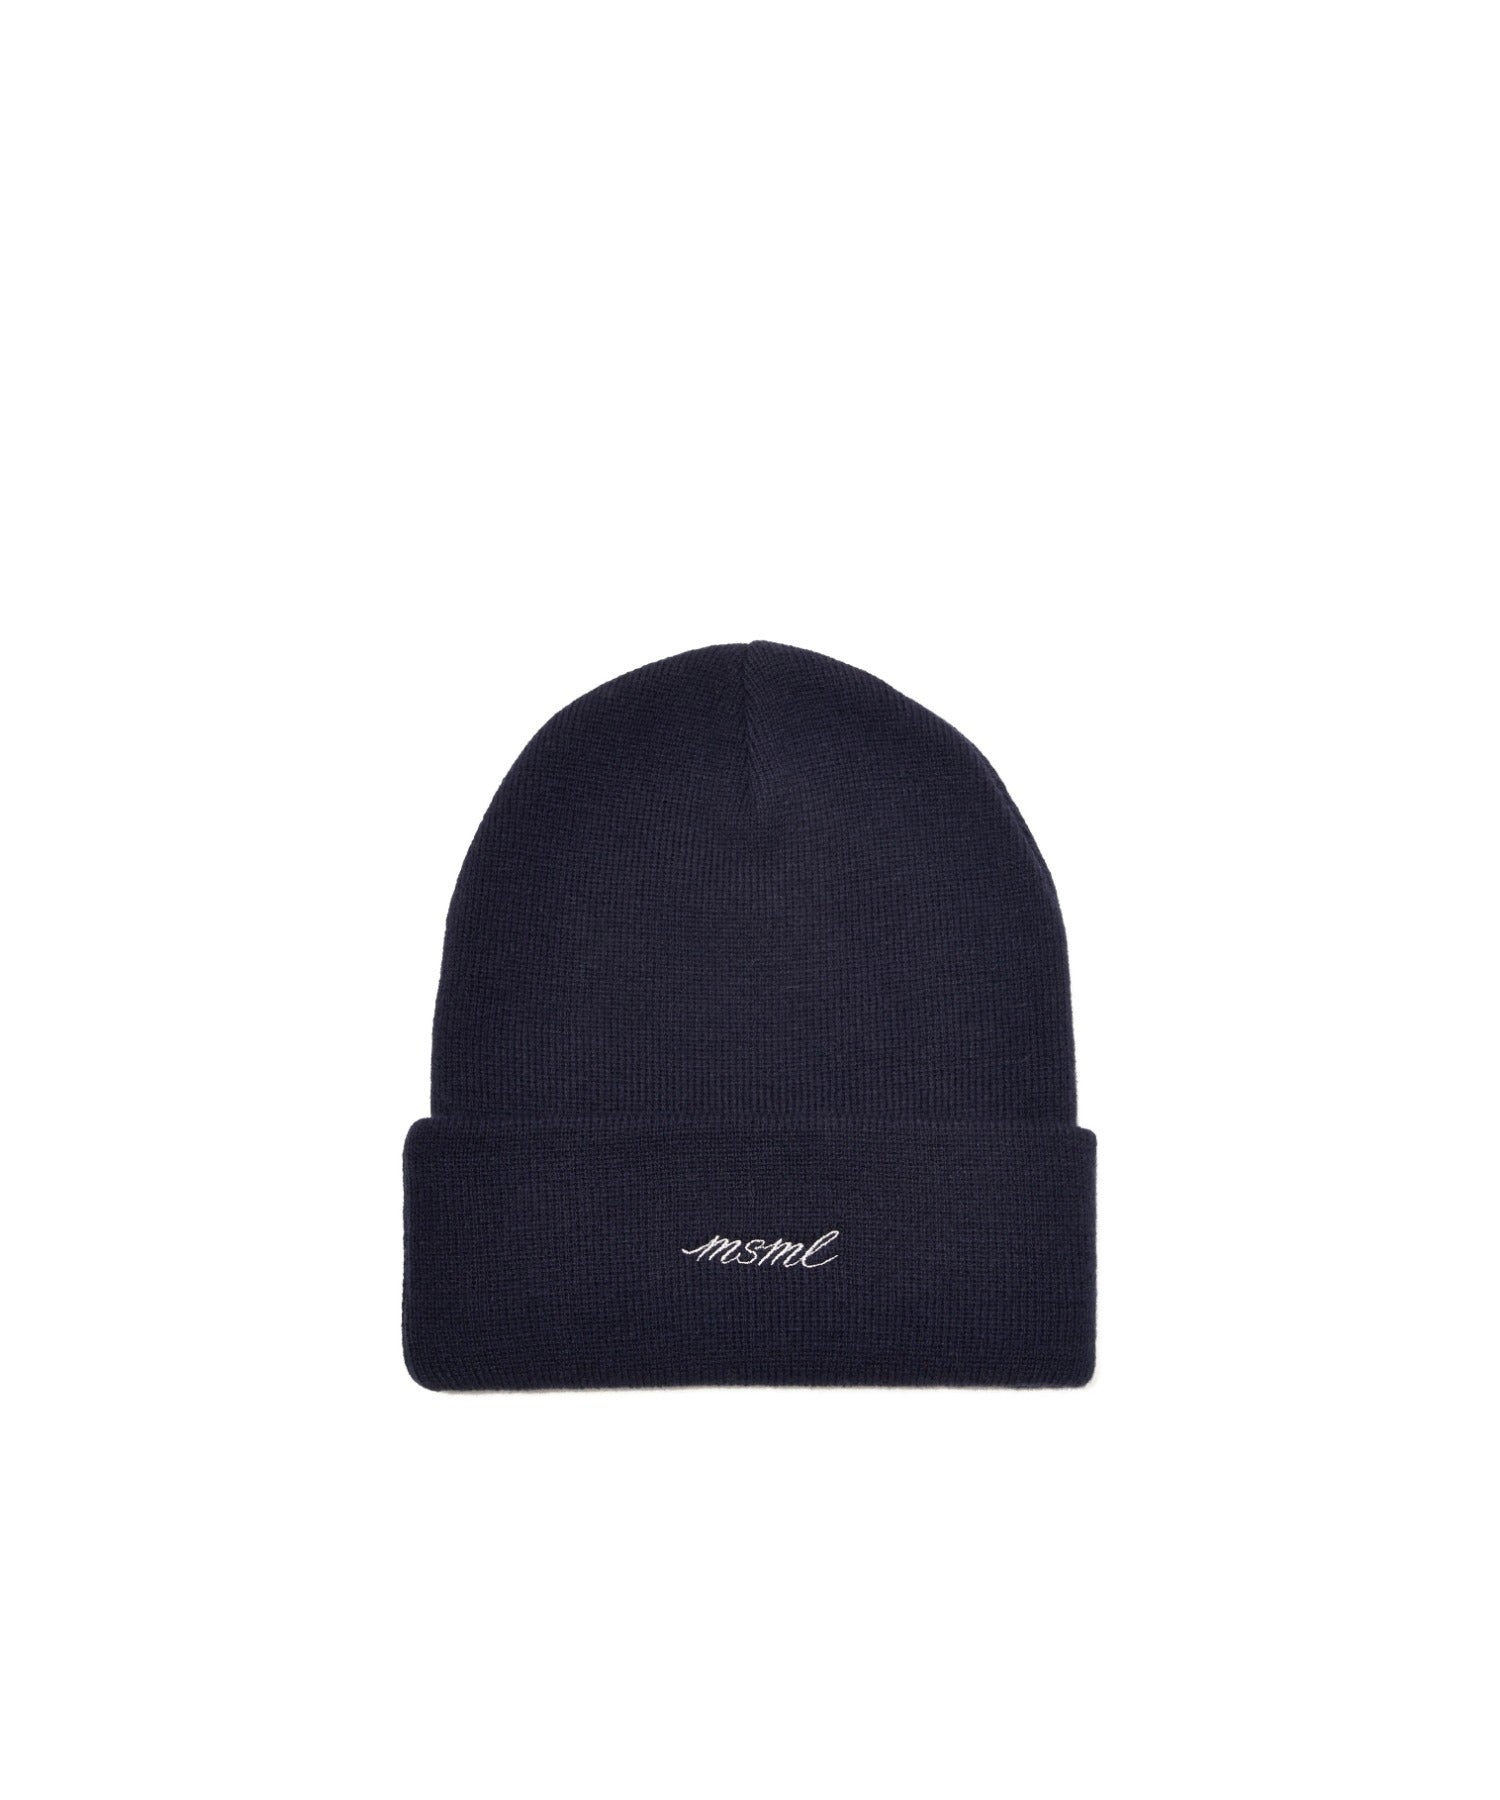 EMBROIDERY KNIT BEANIE